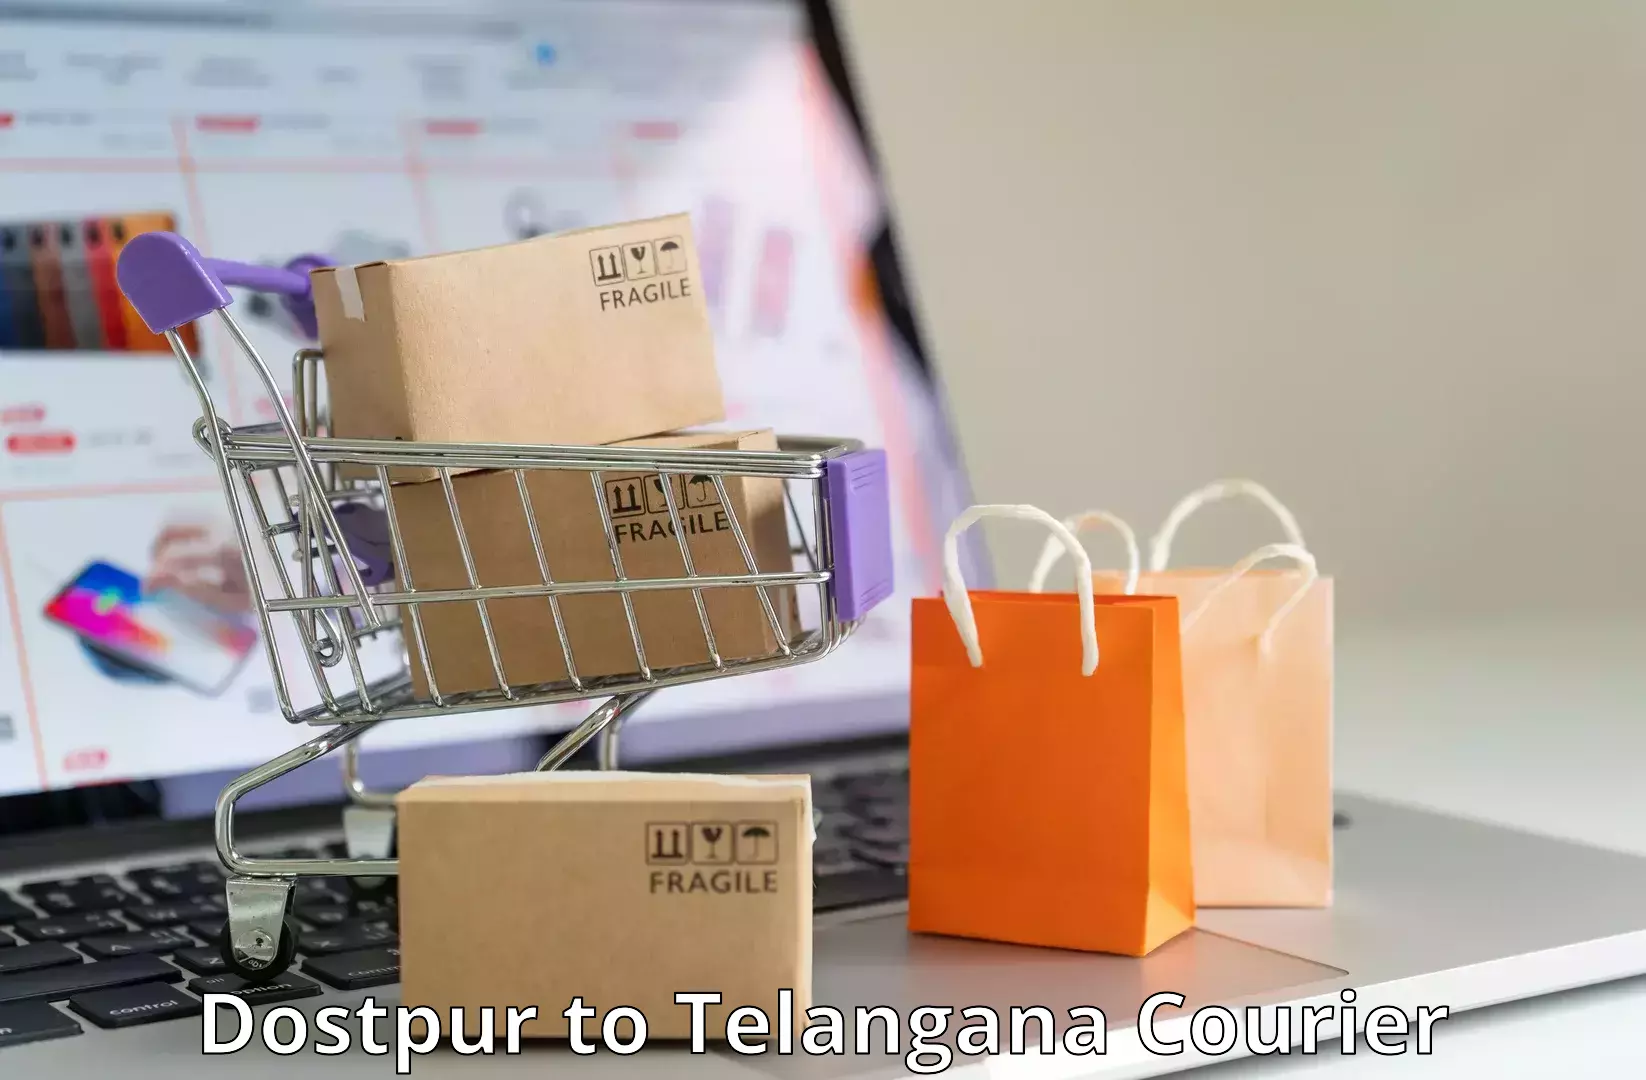 Same-day delivery options Dostpur to Madgulapally